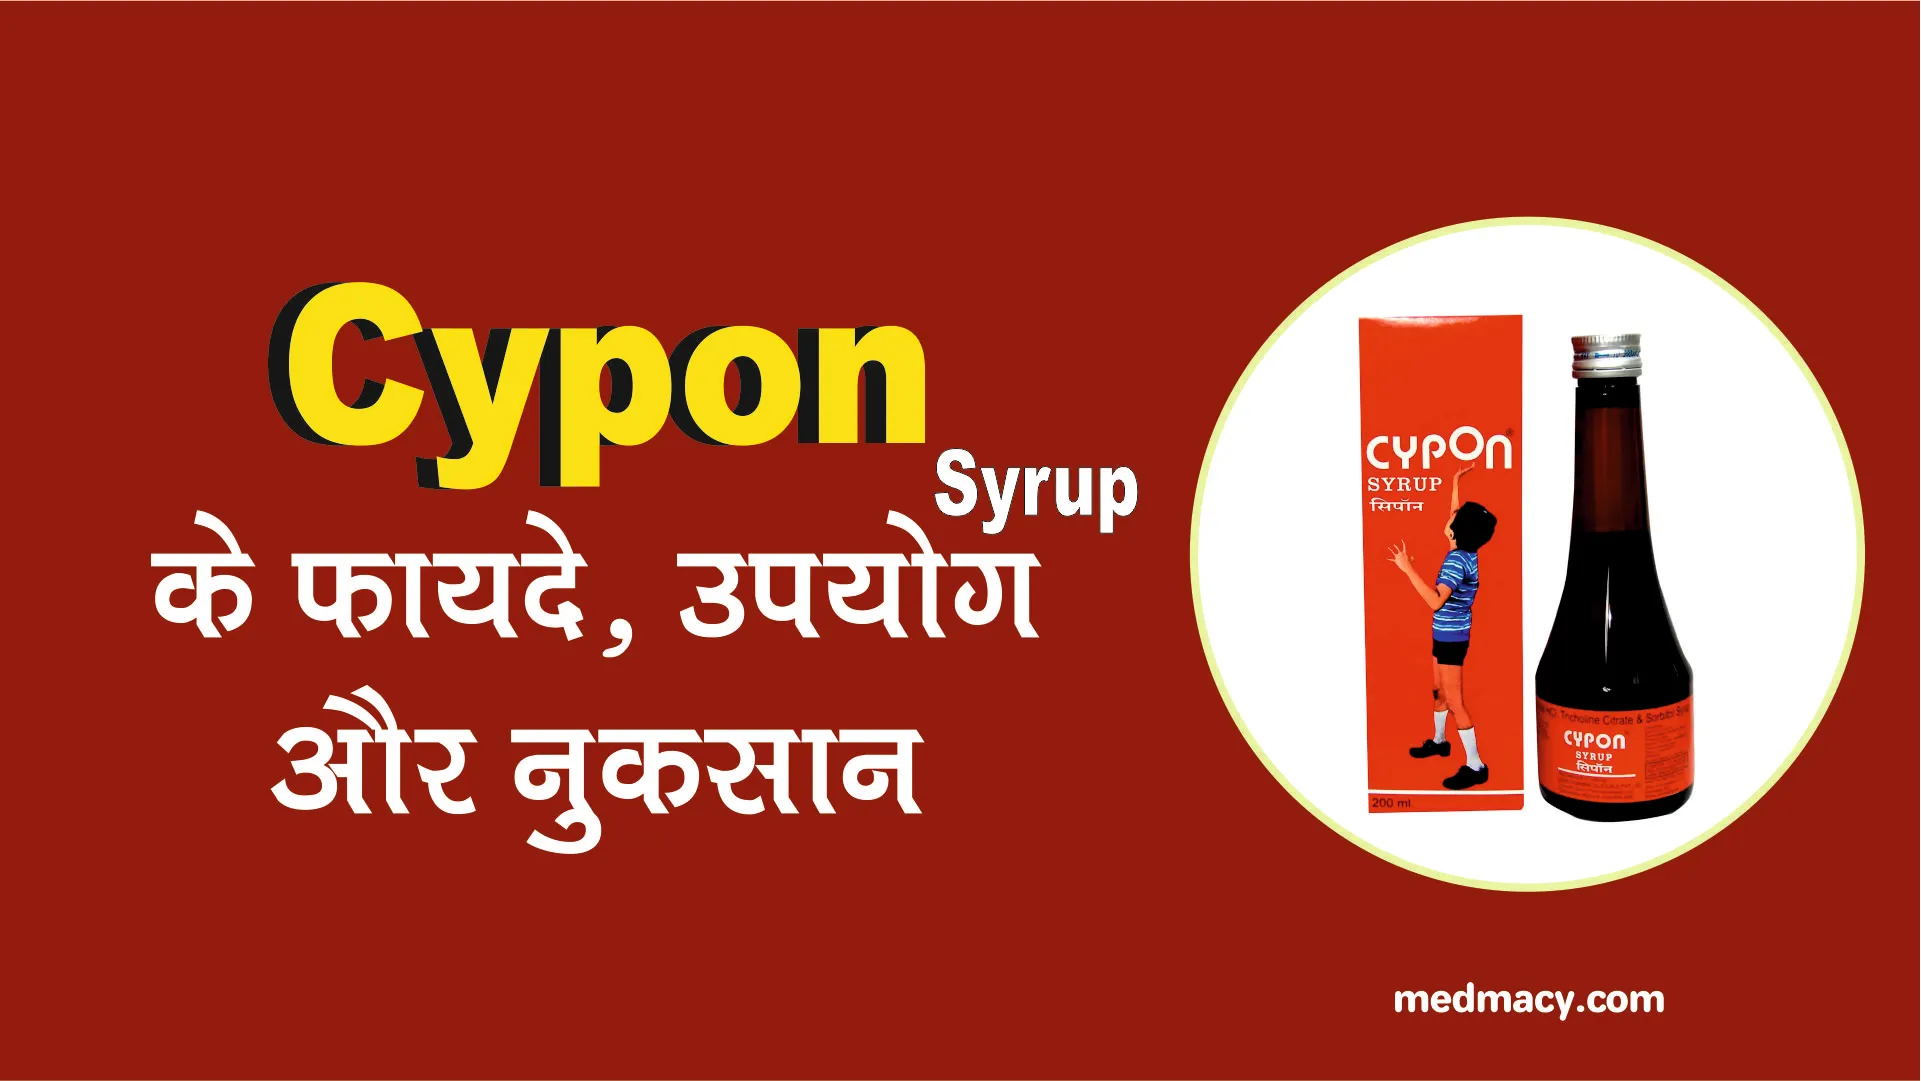 Cypon Syrup Uses in Hindi